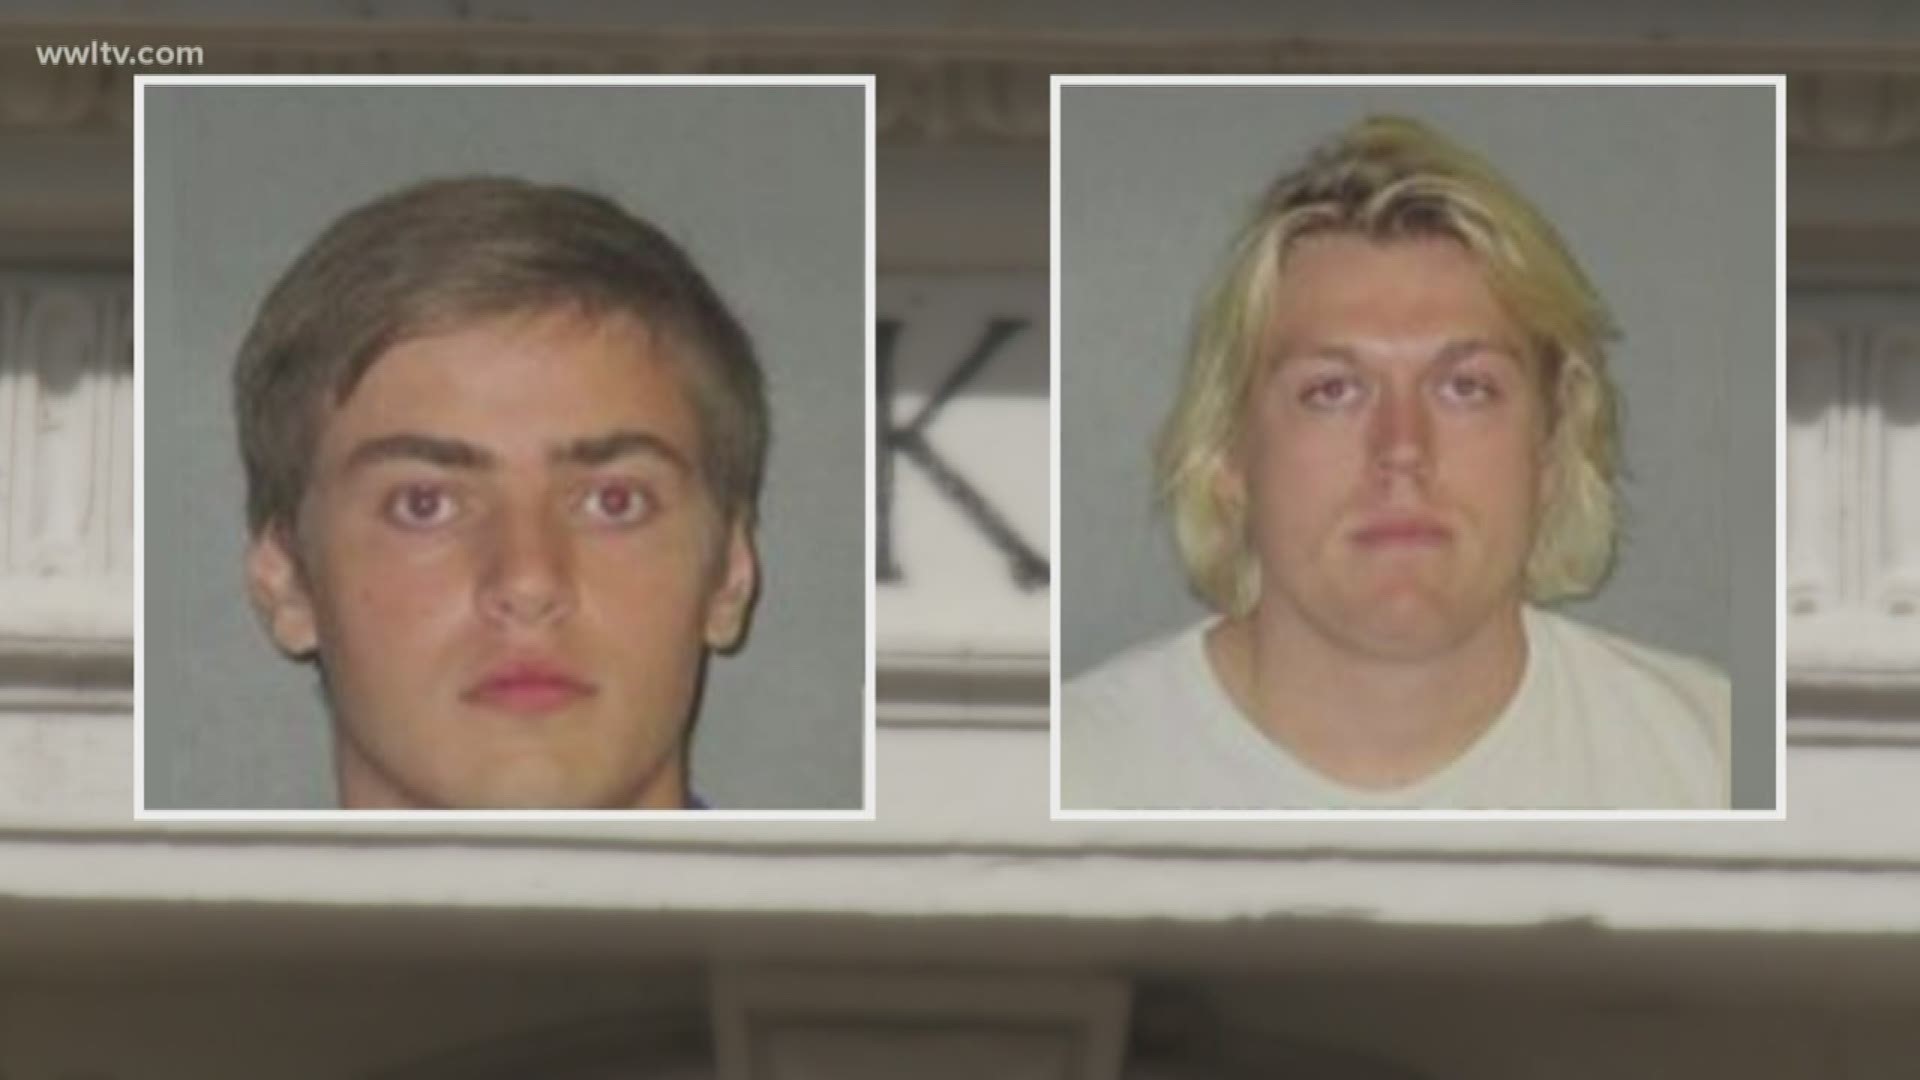 Two former LSU students and Phi Delta Theta fraternity brothers will spend the next month in jail for their role in the death of fraternity pledge Max Gruver in 2017.